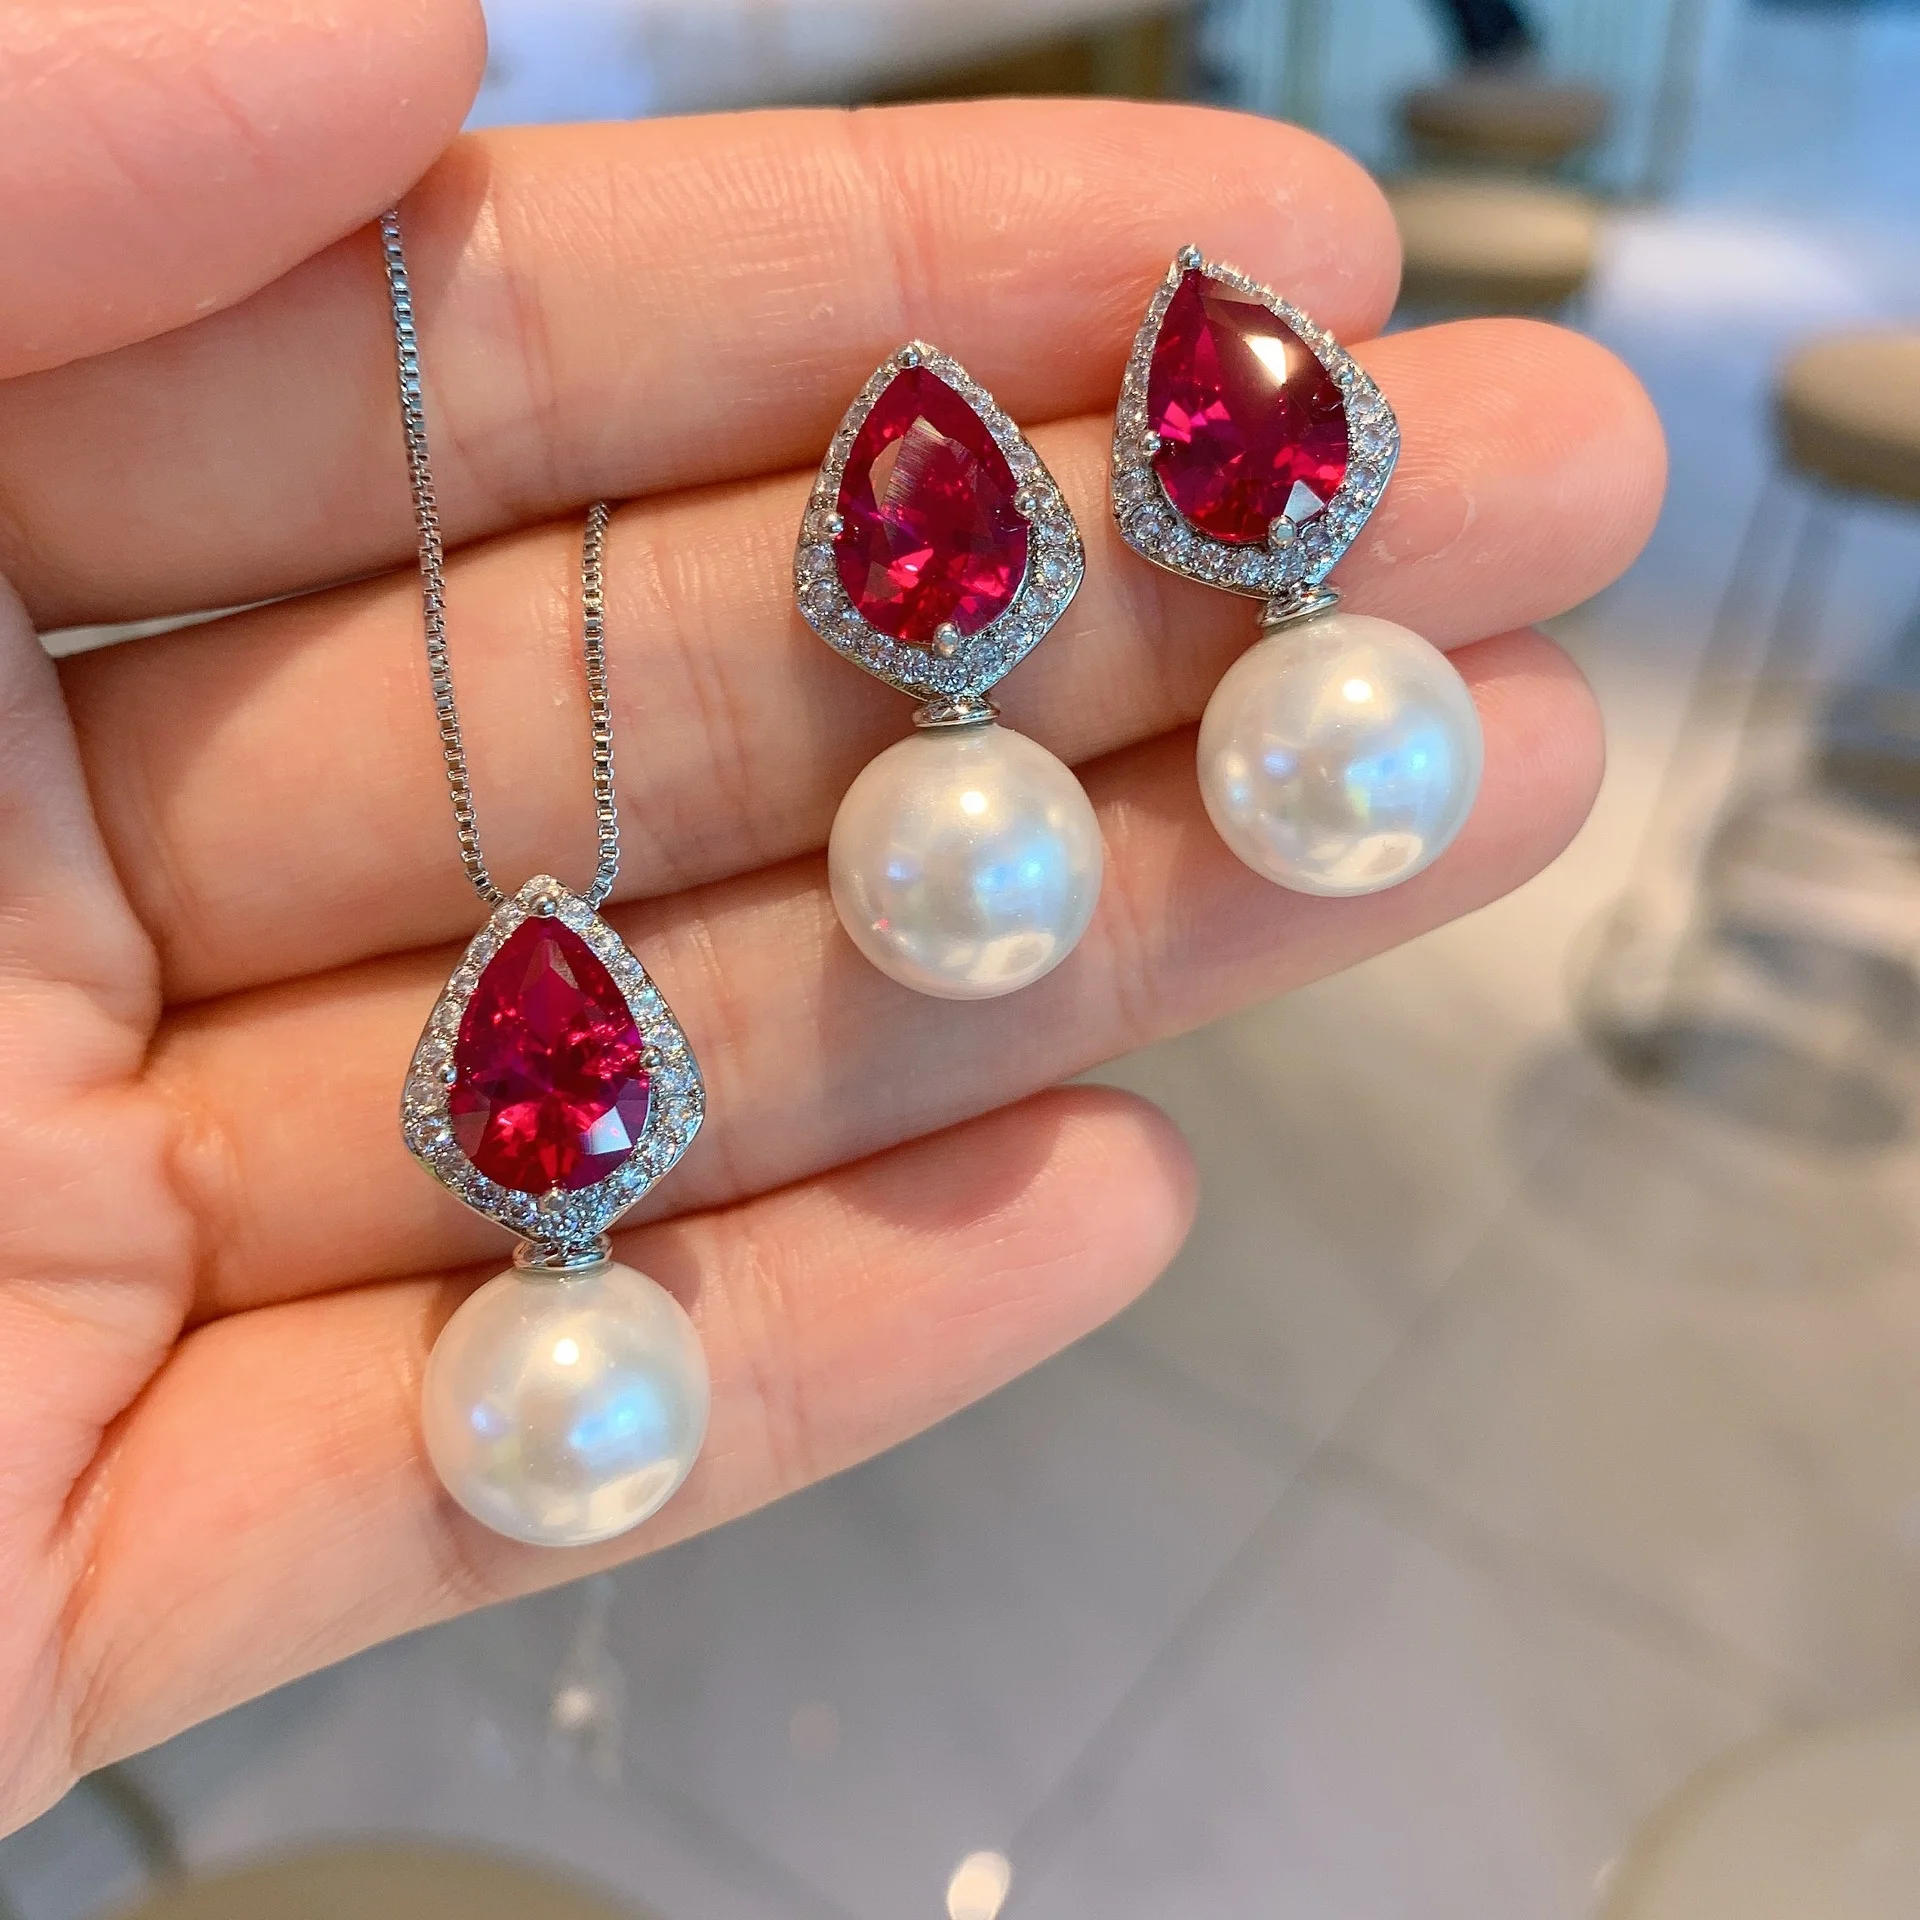 

Vintage Charms Gemstone Jewelry Sets for Women Luxury Pear-Shaped Ruby Pendant Necklace Earrings, Customized color